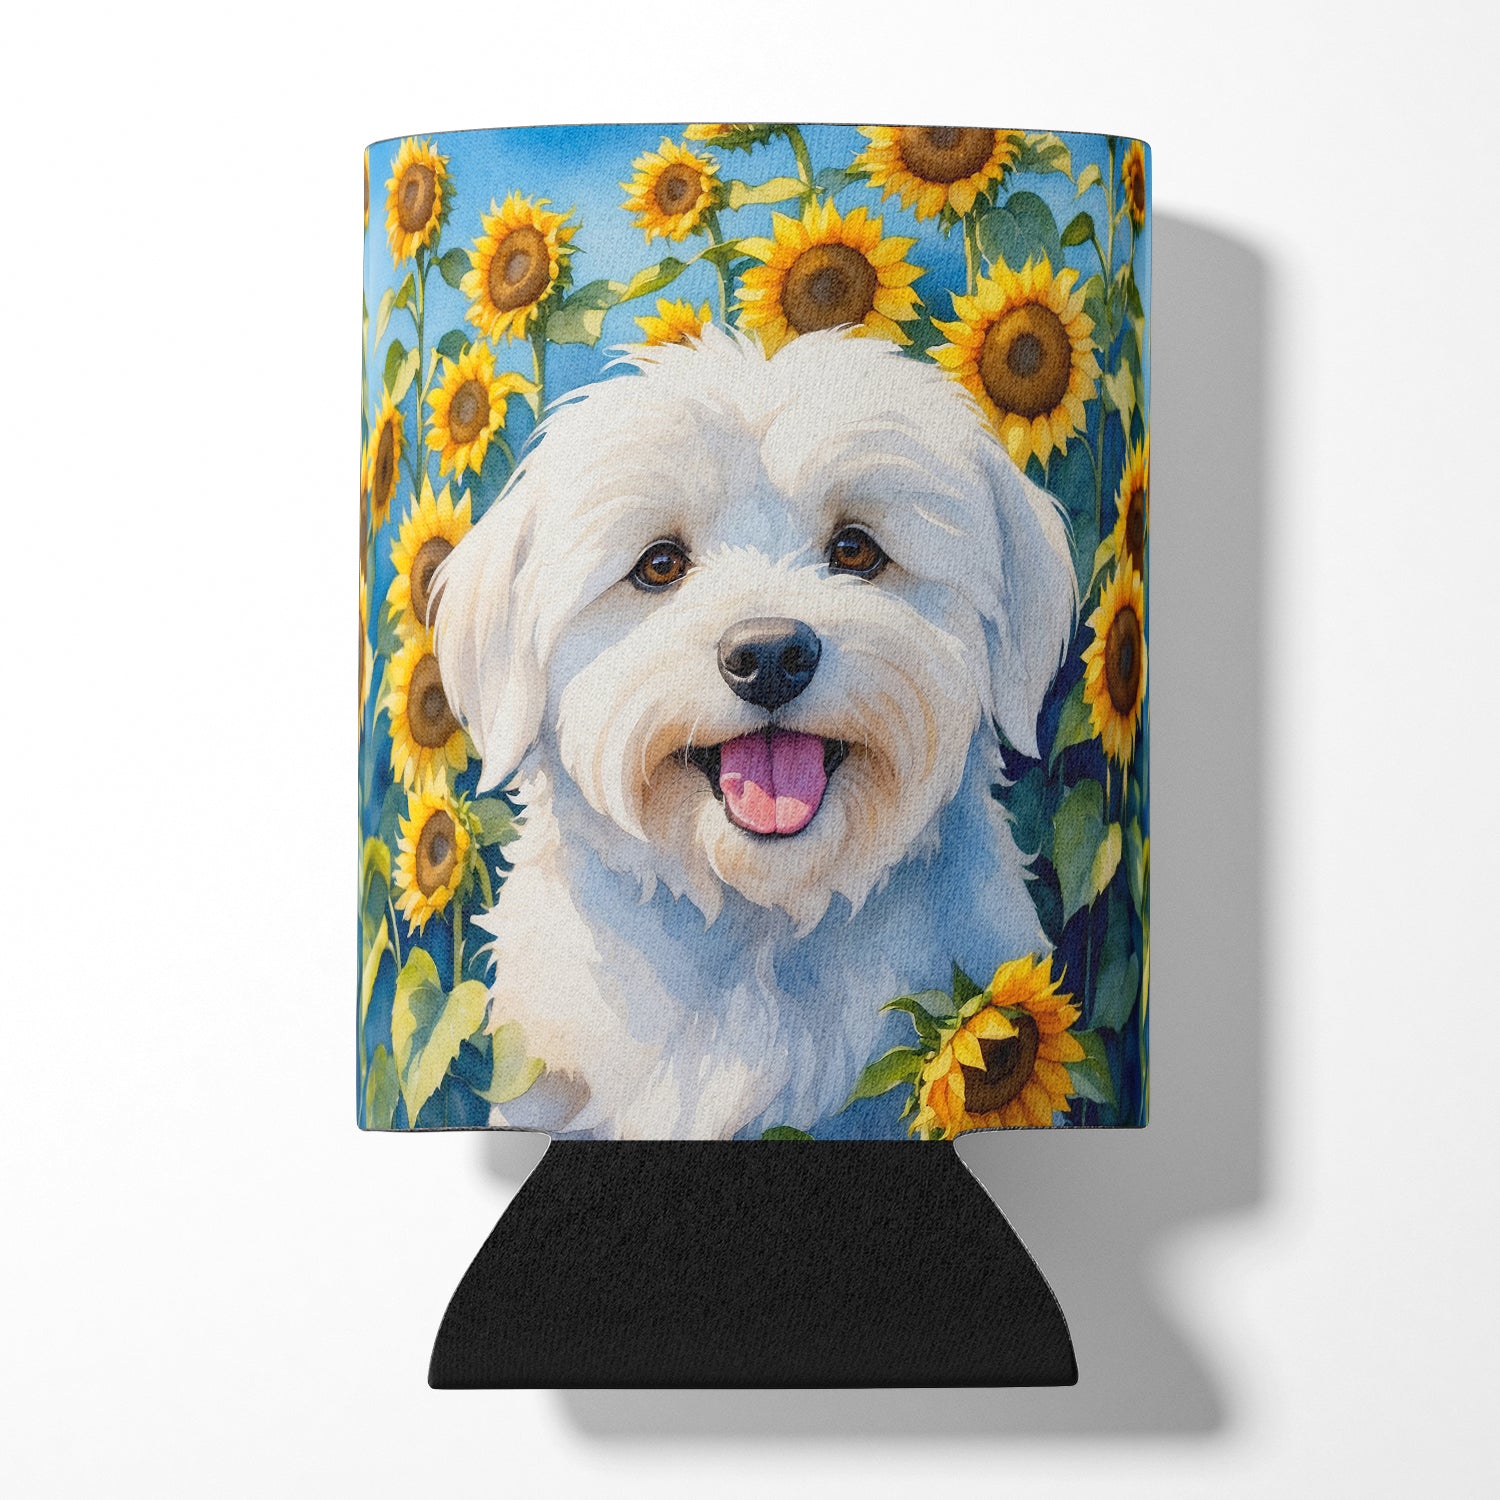 Buy this Coton de Tulear in Sunflowers Can or Bottle Hugger